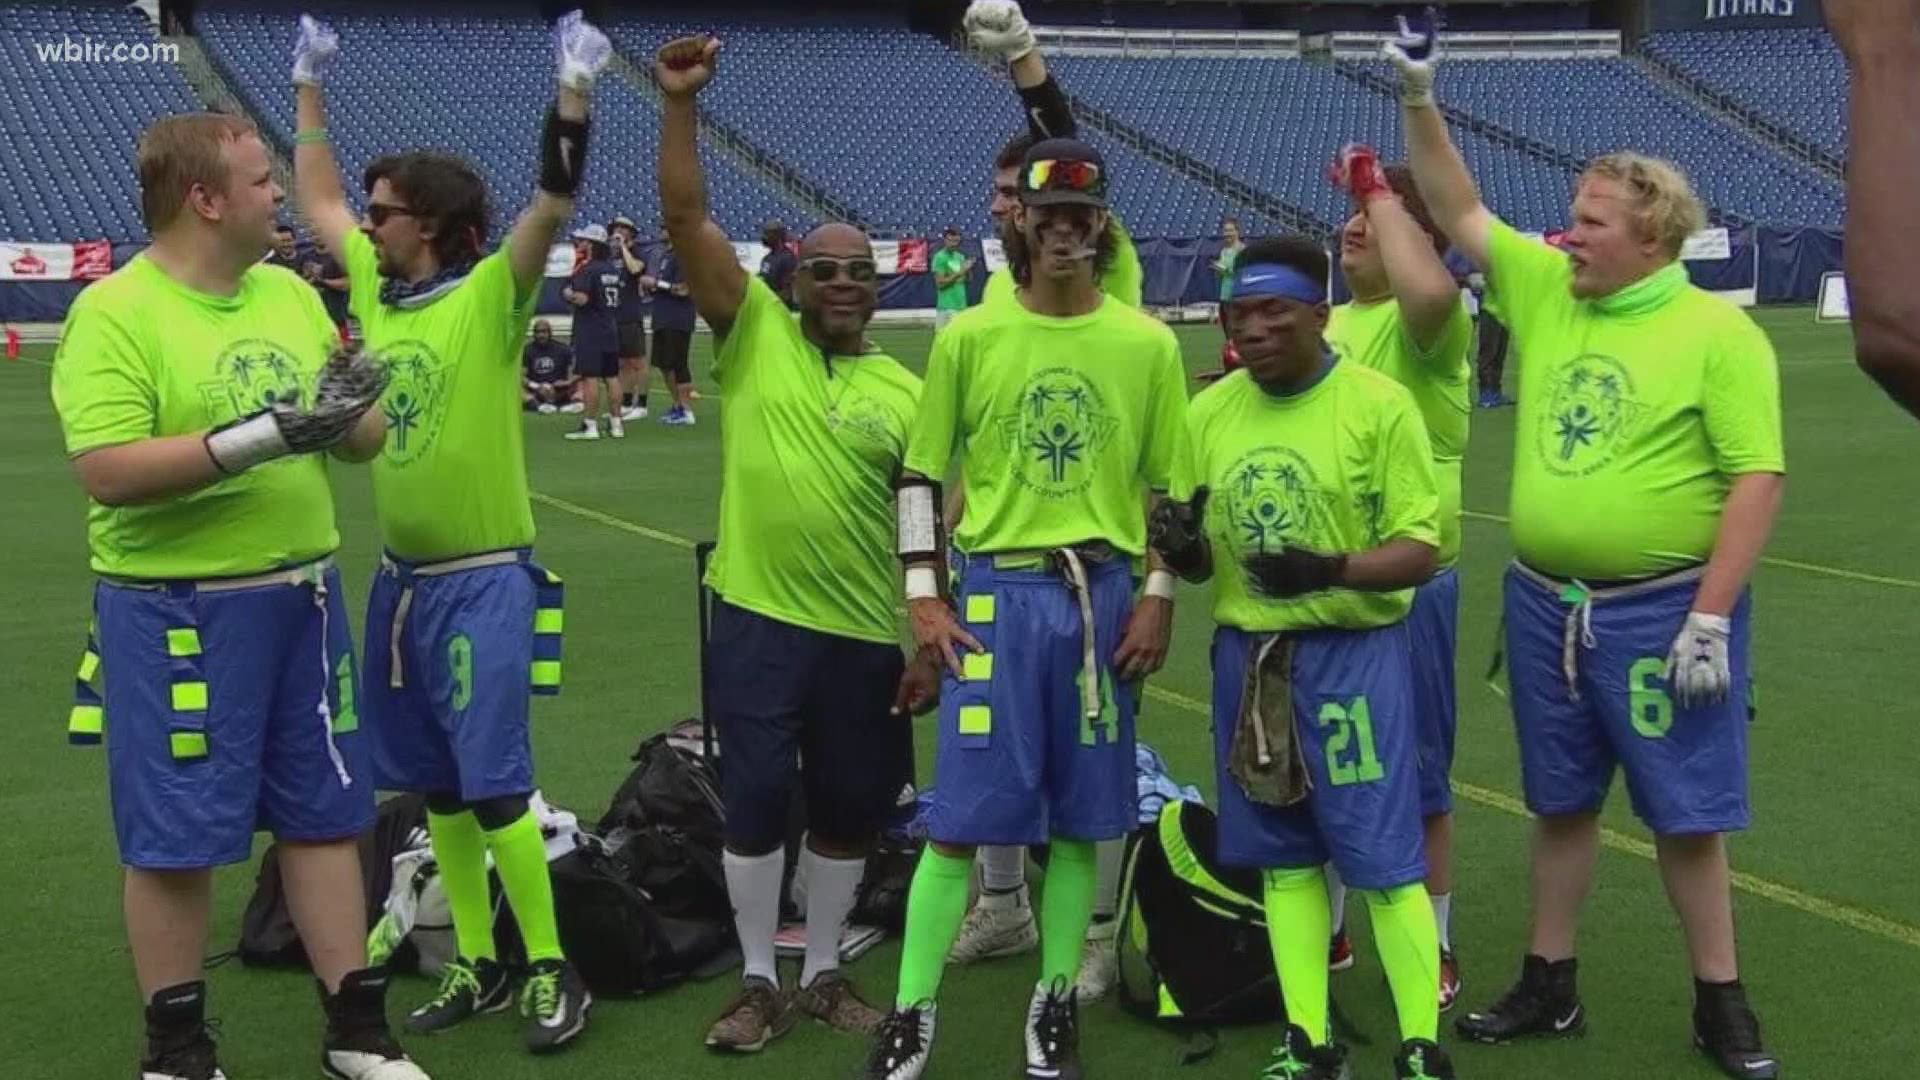 A Tennessee flag football team will be heading to the Special Olympics USA Games next year.